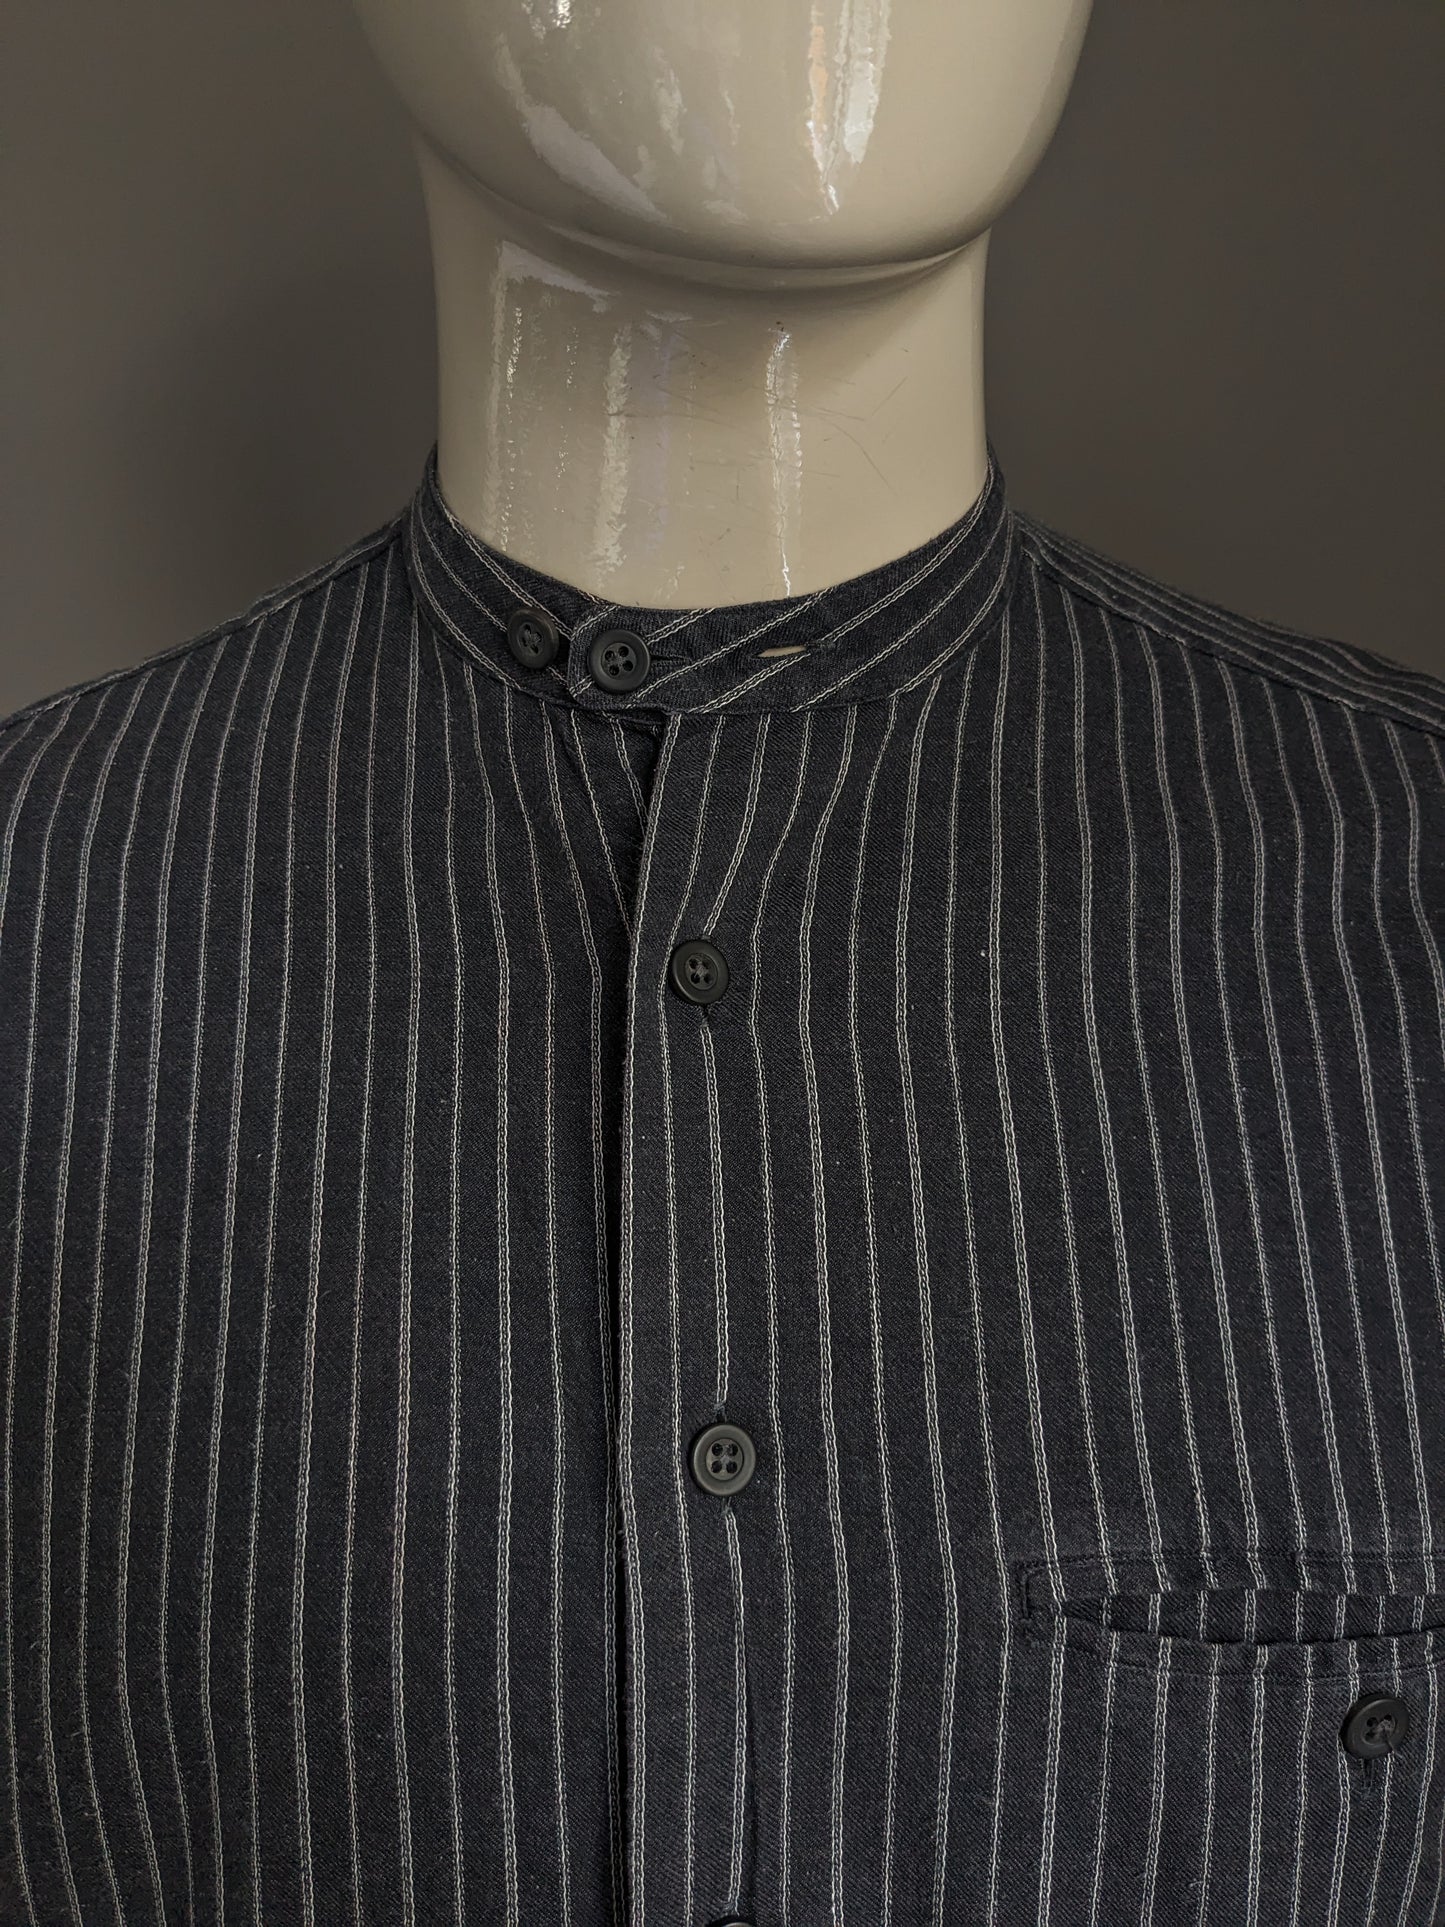 Vintage Boss Hugo Boss shirt with Mao / Farmers / Standing Collar. Black and white striped. Size M / L.